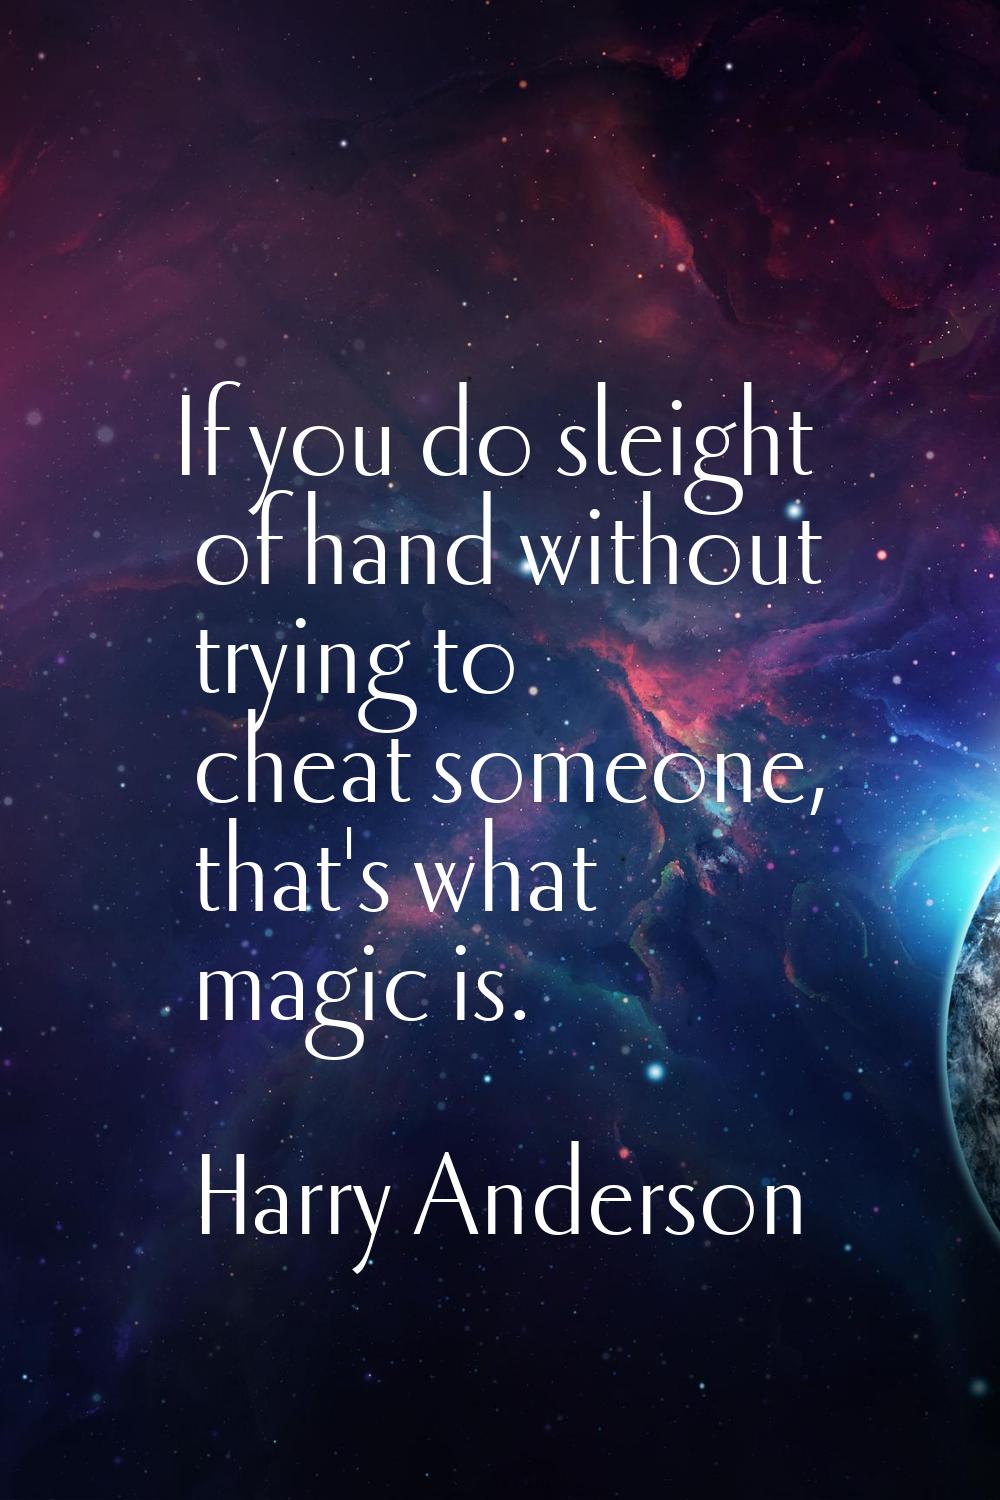 If you do sleight of hand without trying to cheat someone, that's what magic is.